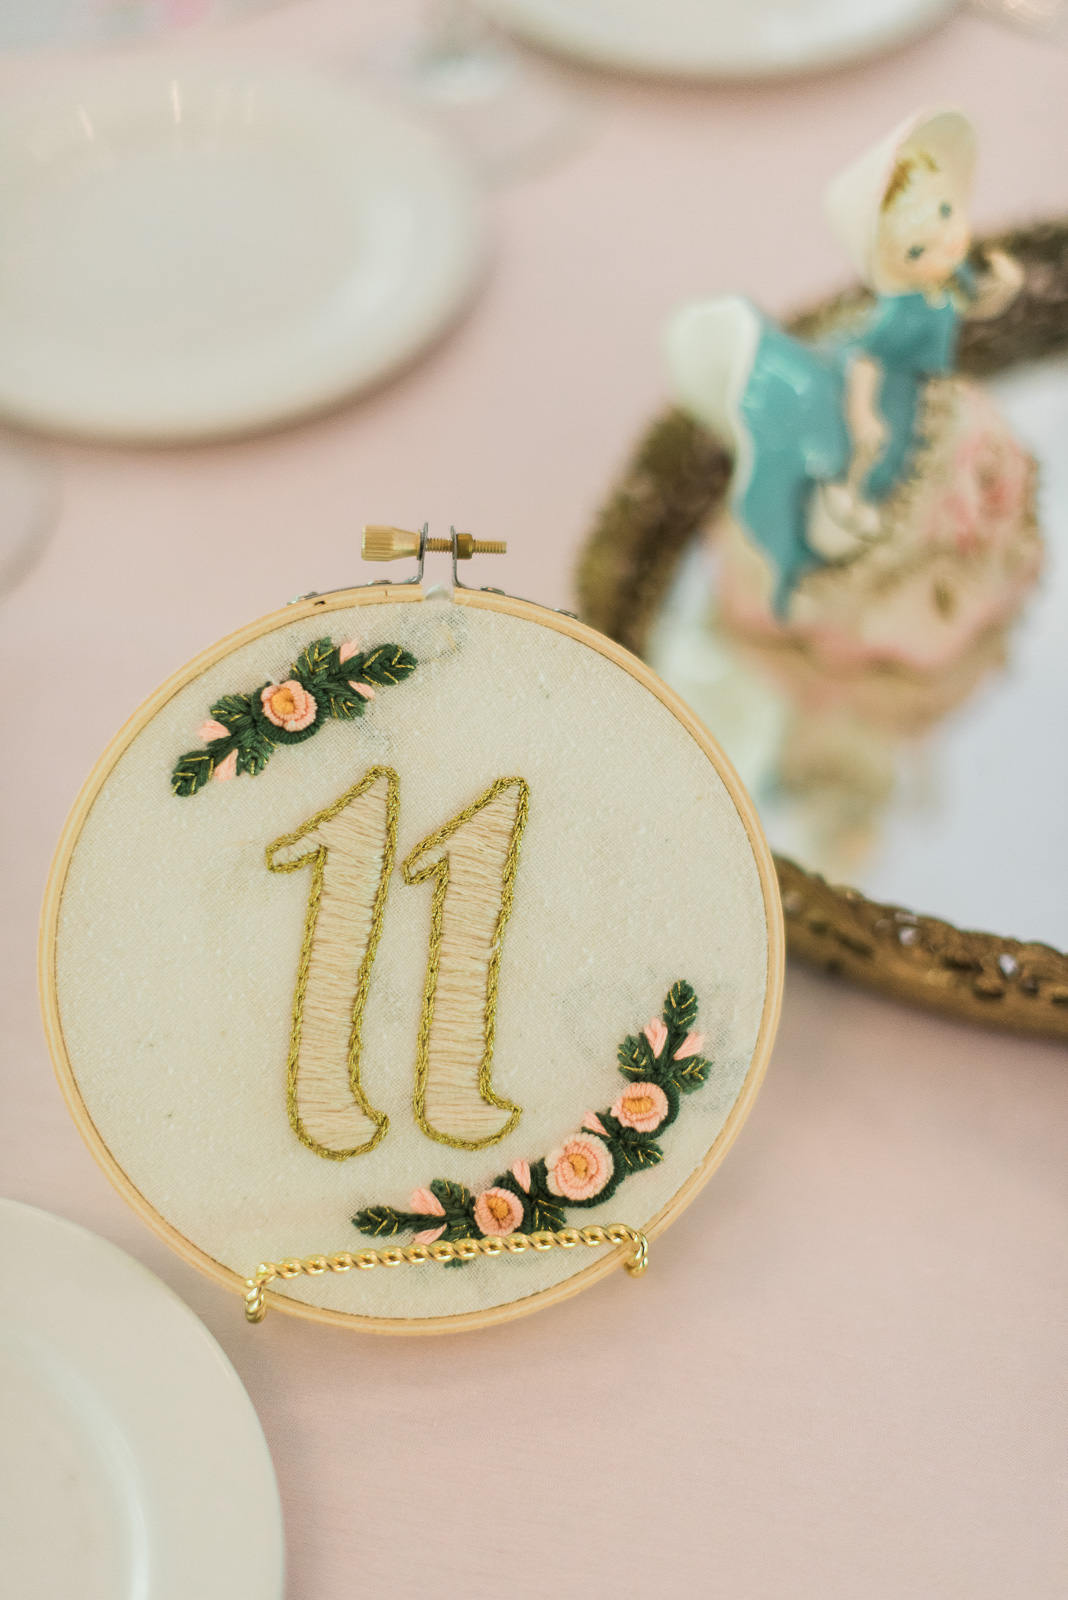 embroidered table numbers via https://etsy.me/2xuxqky